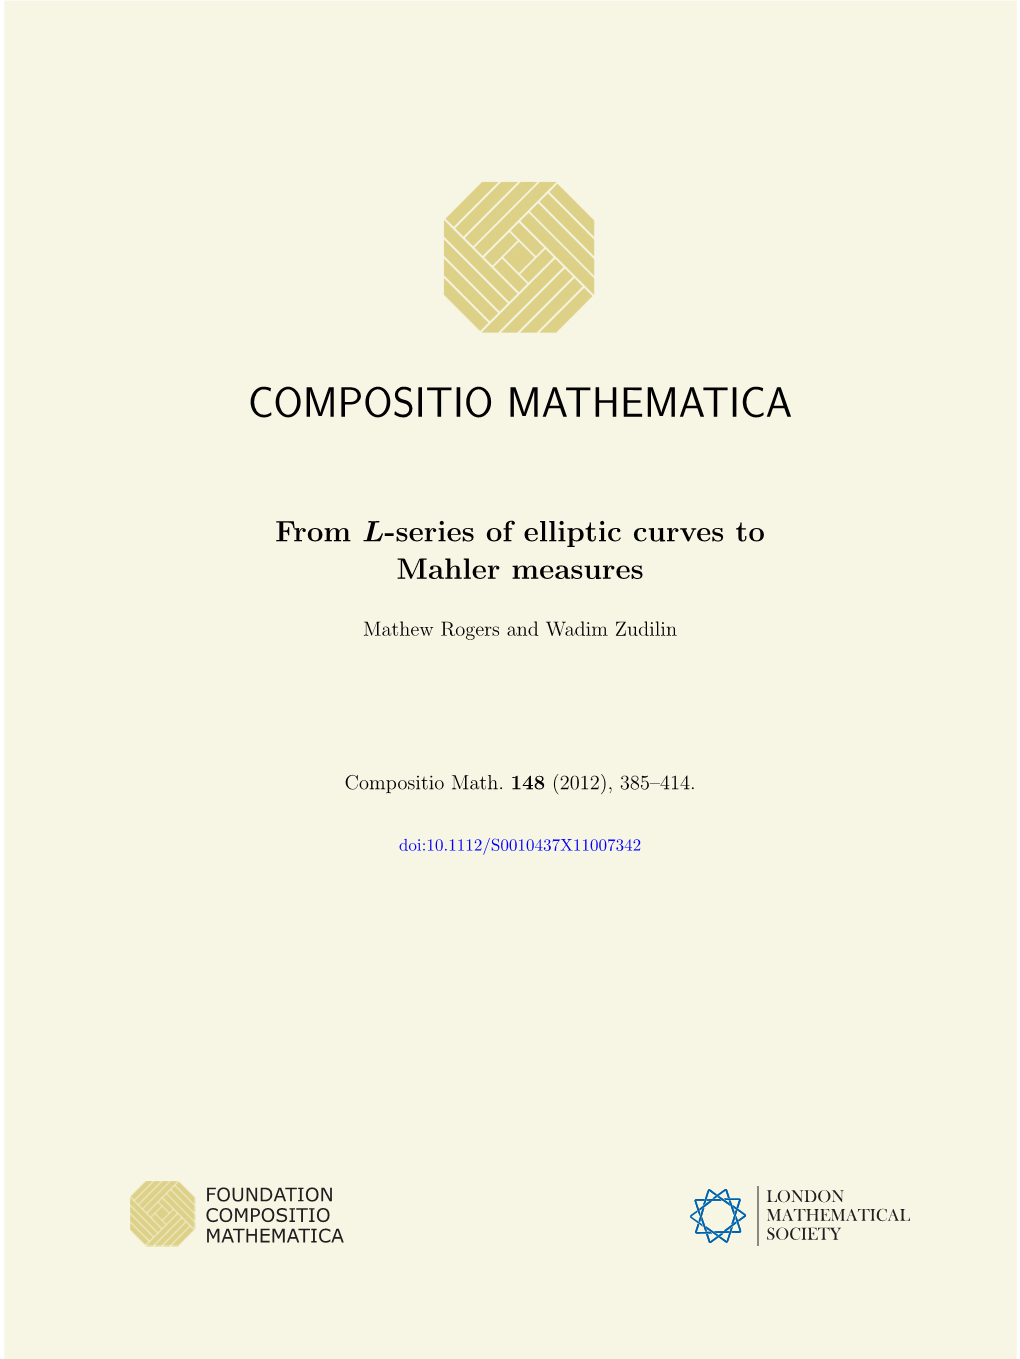 From L-Series of Elliptic Curves to Mahler Measures